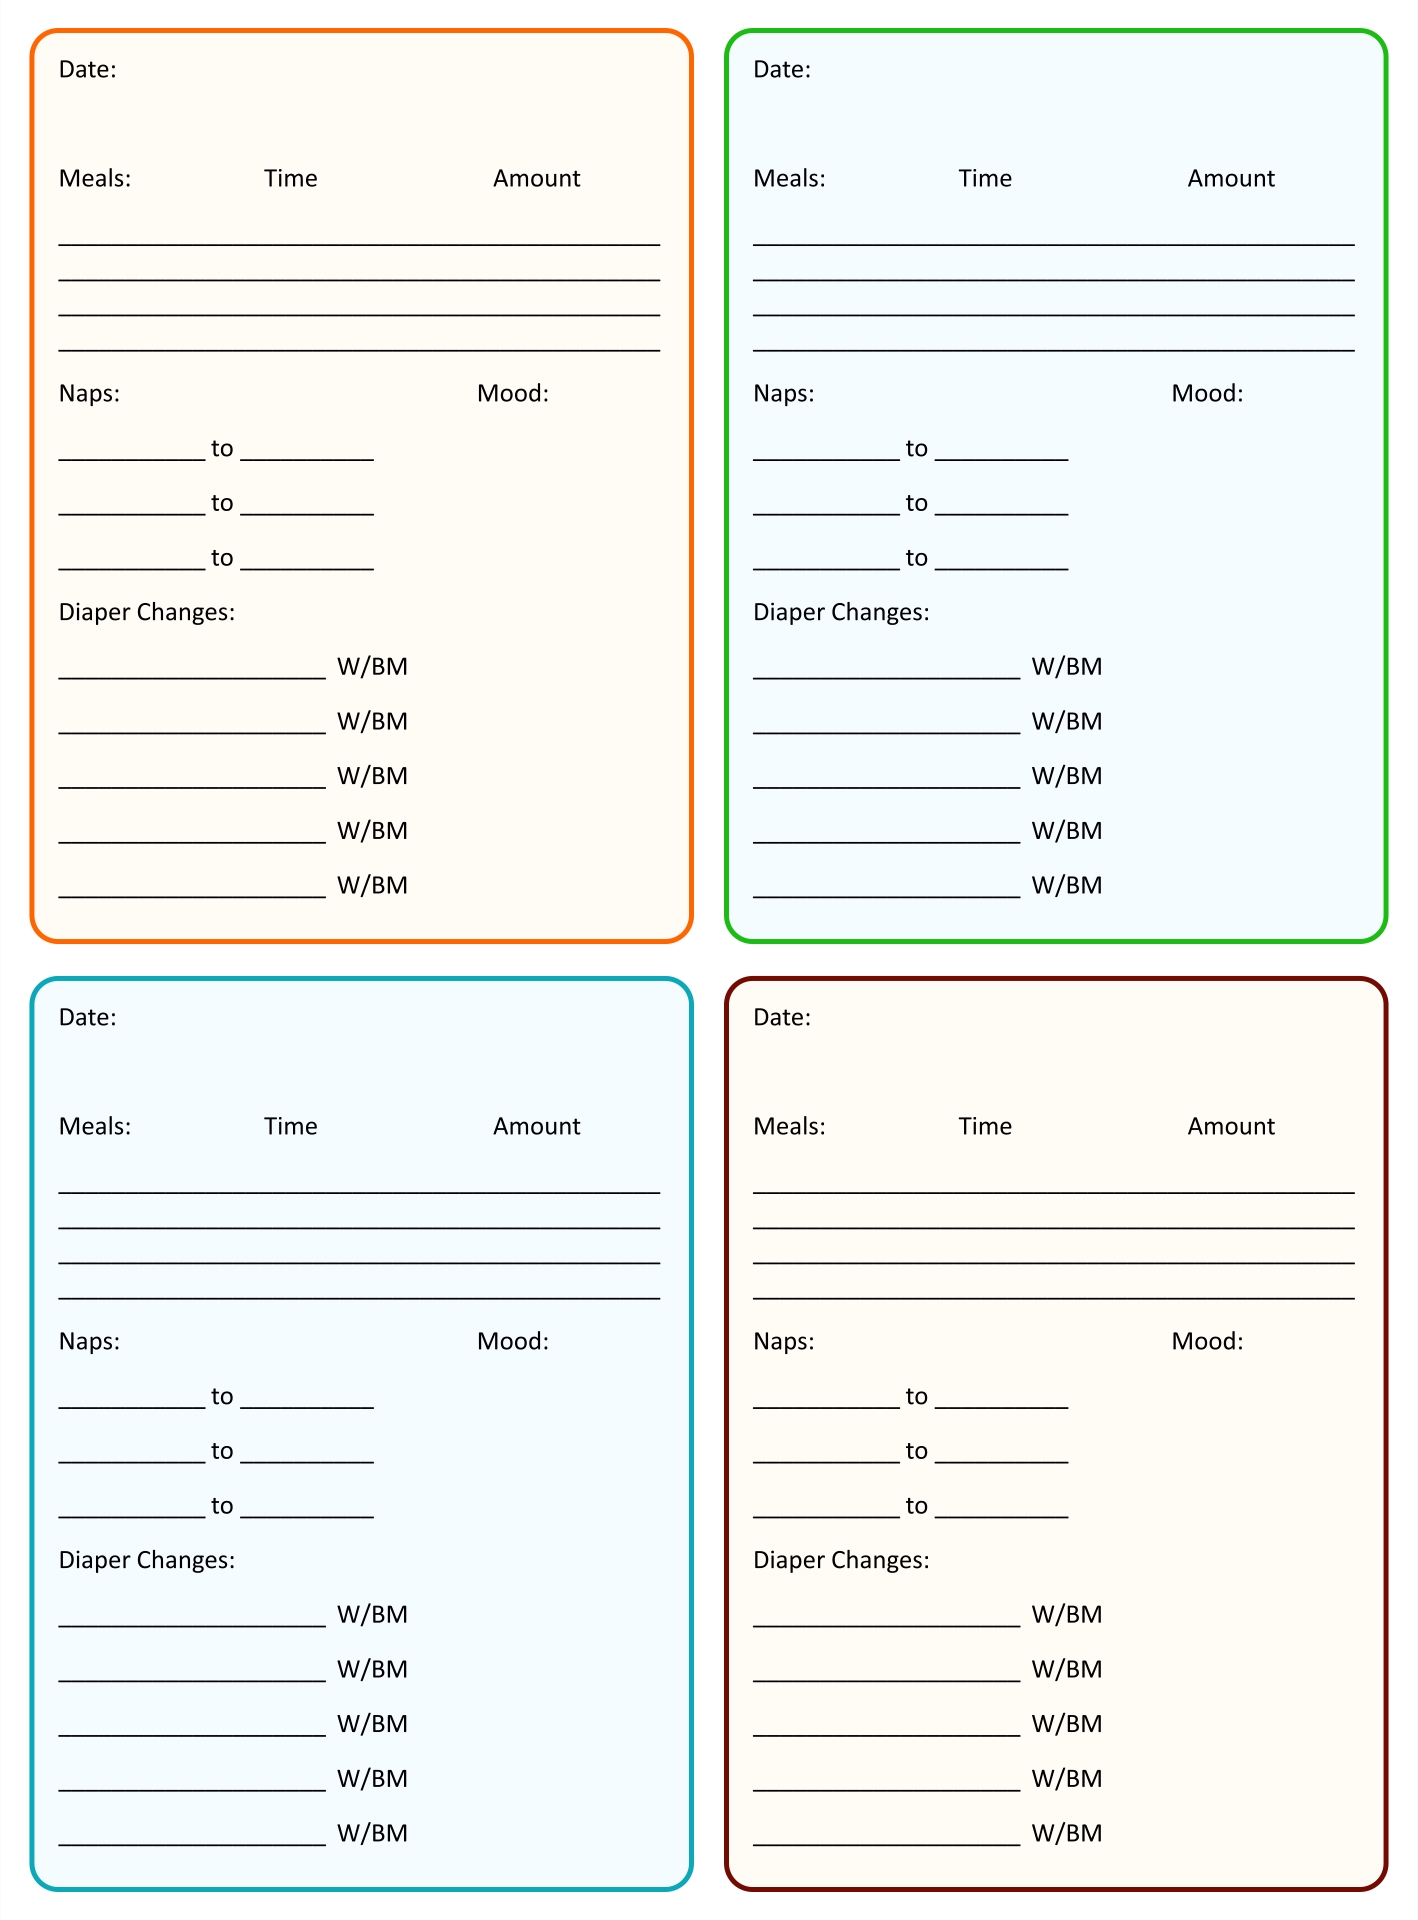 Daycare Infant Daily Report Template Regarding Daycare Infant Daily Report Template